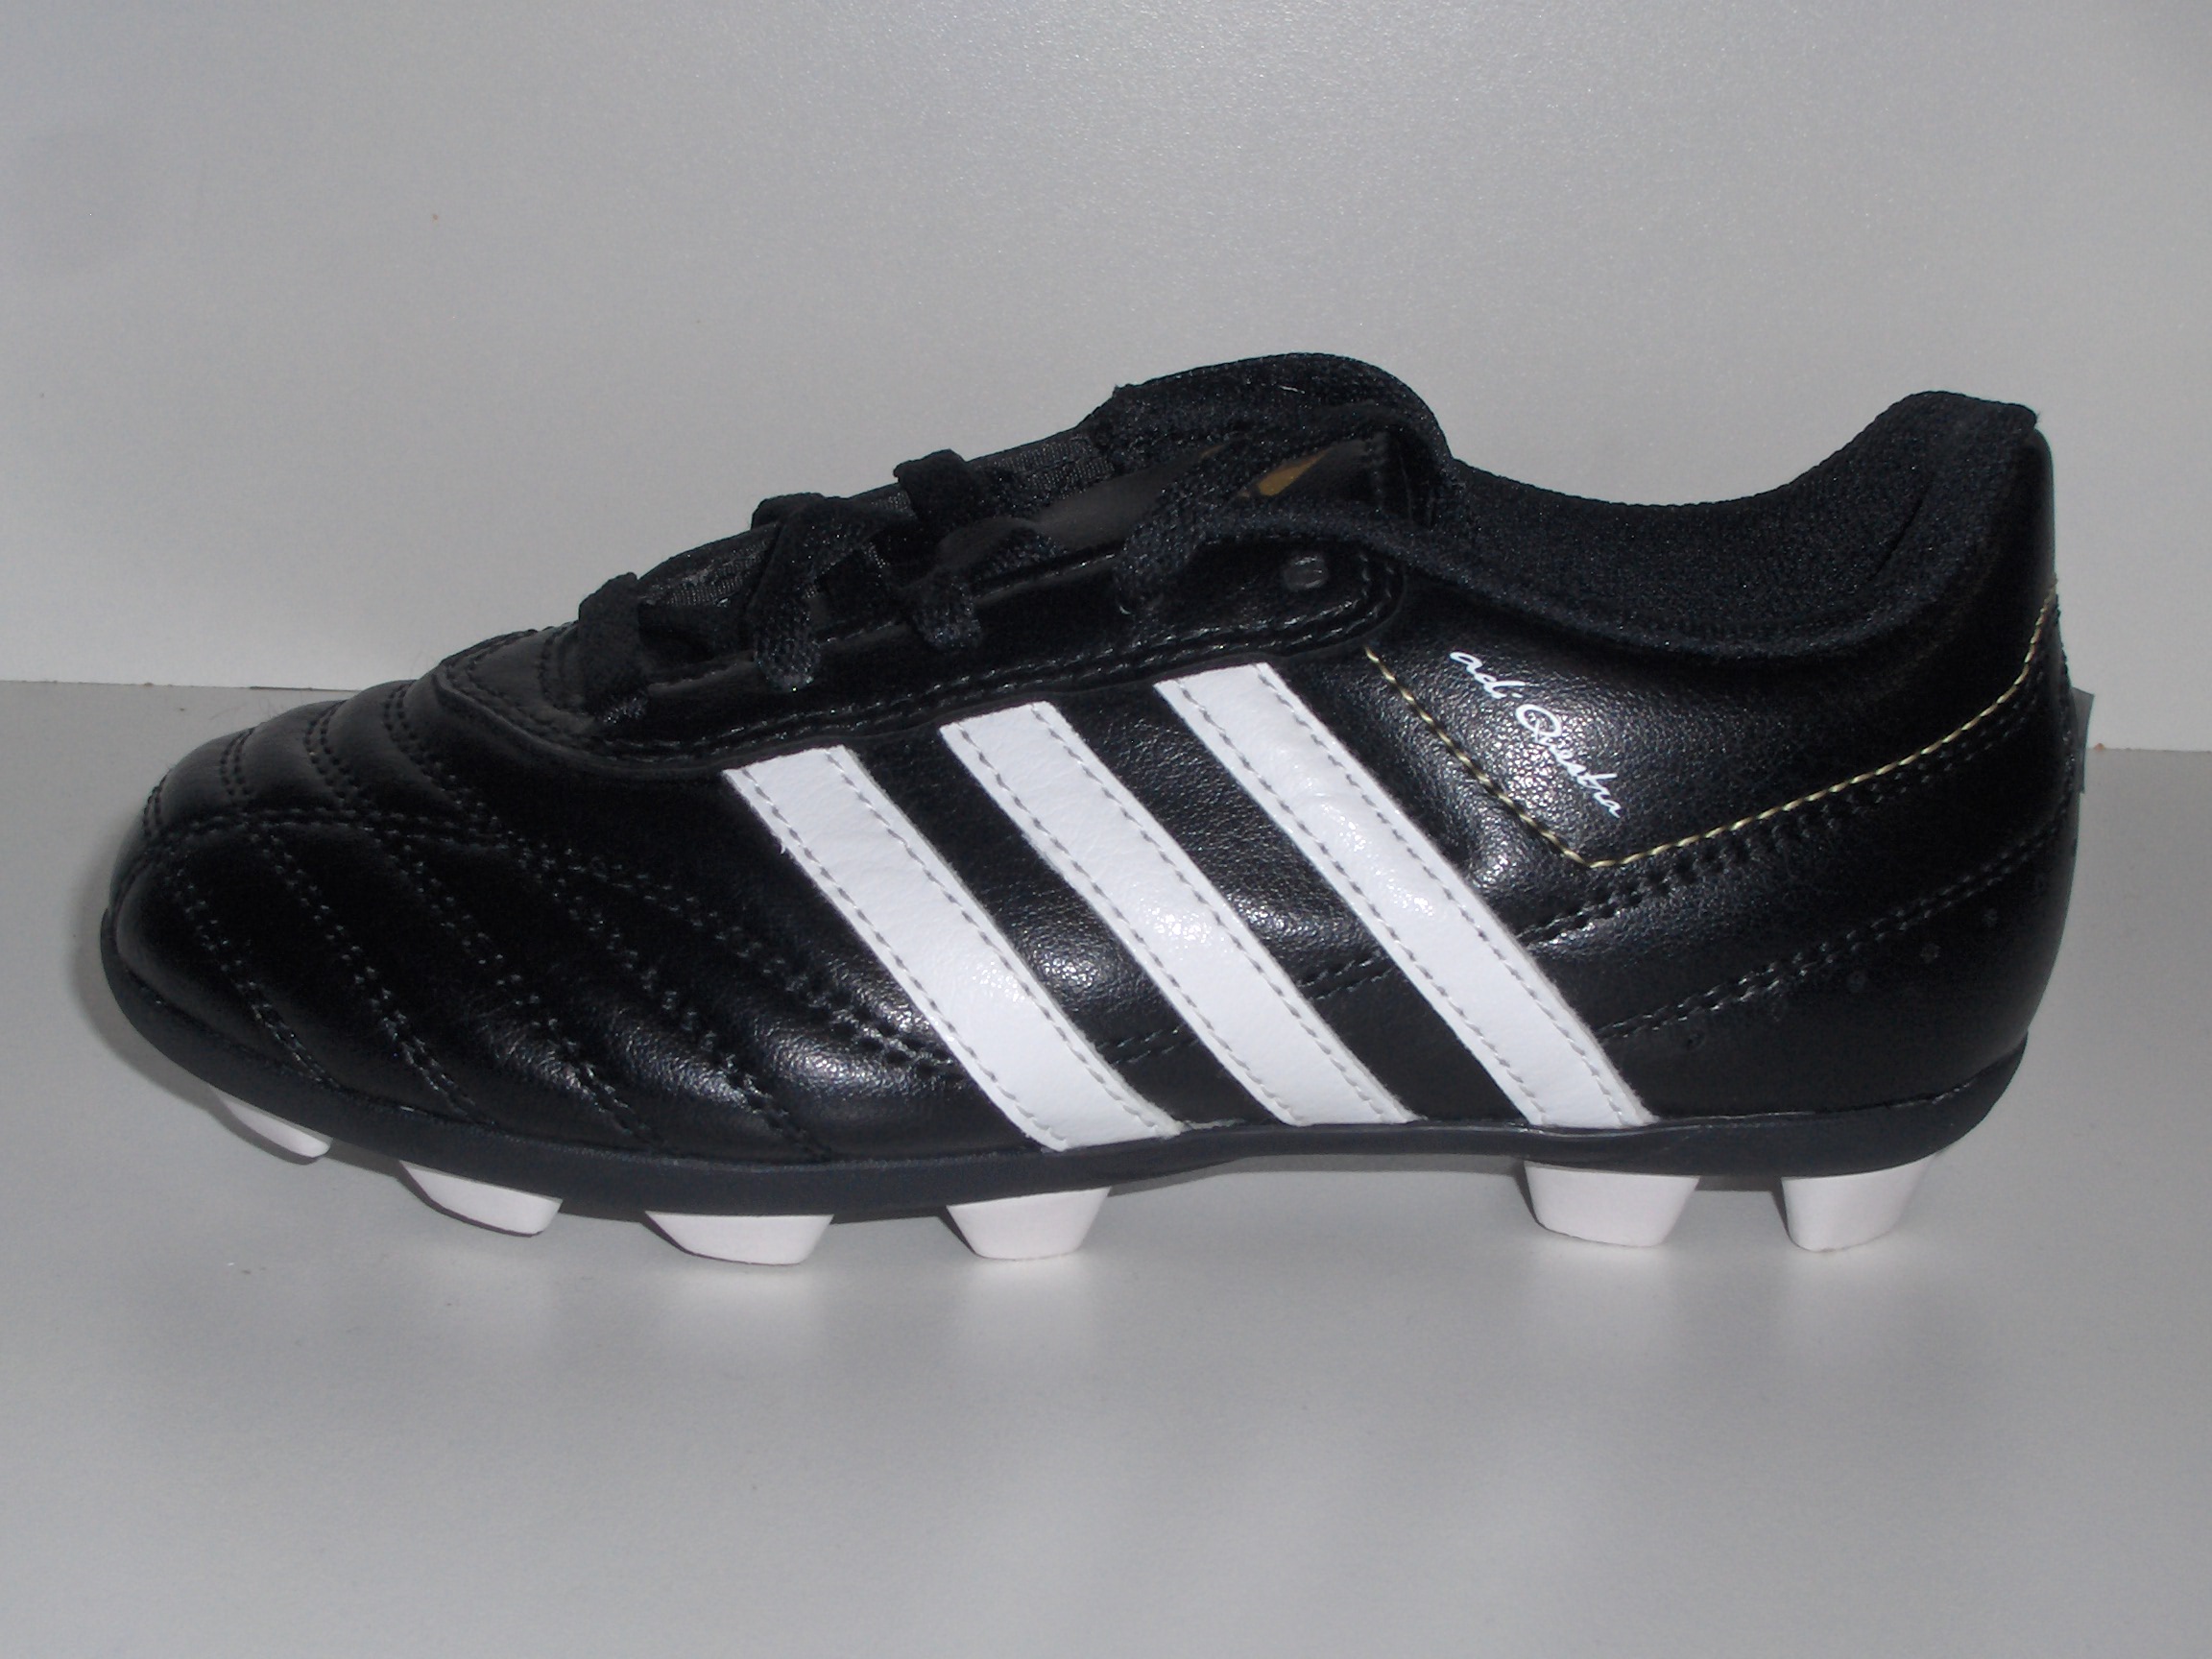 adidas toddler soccer shoes